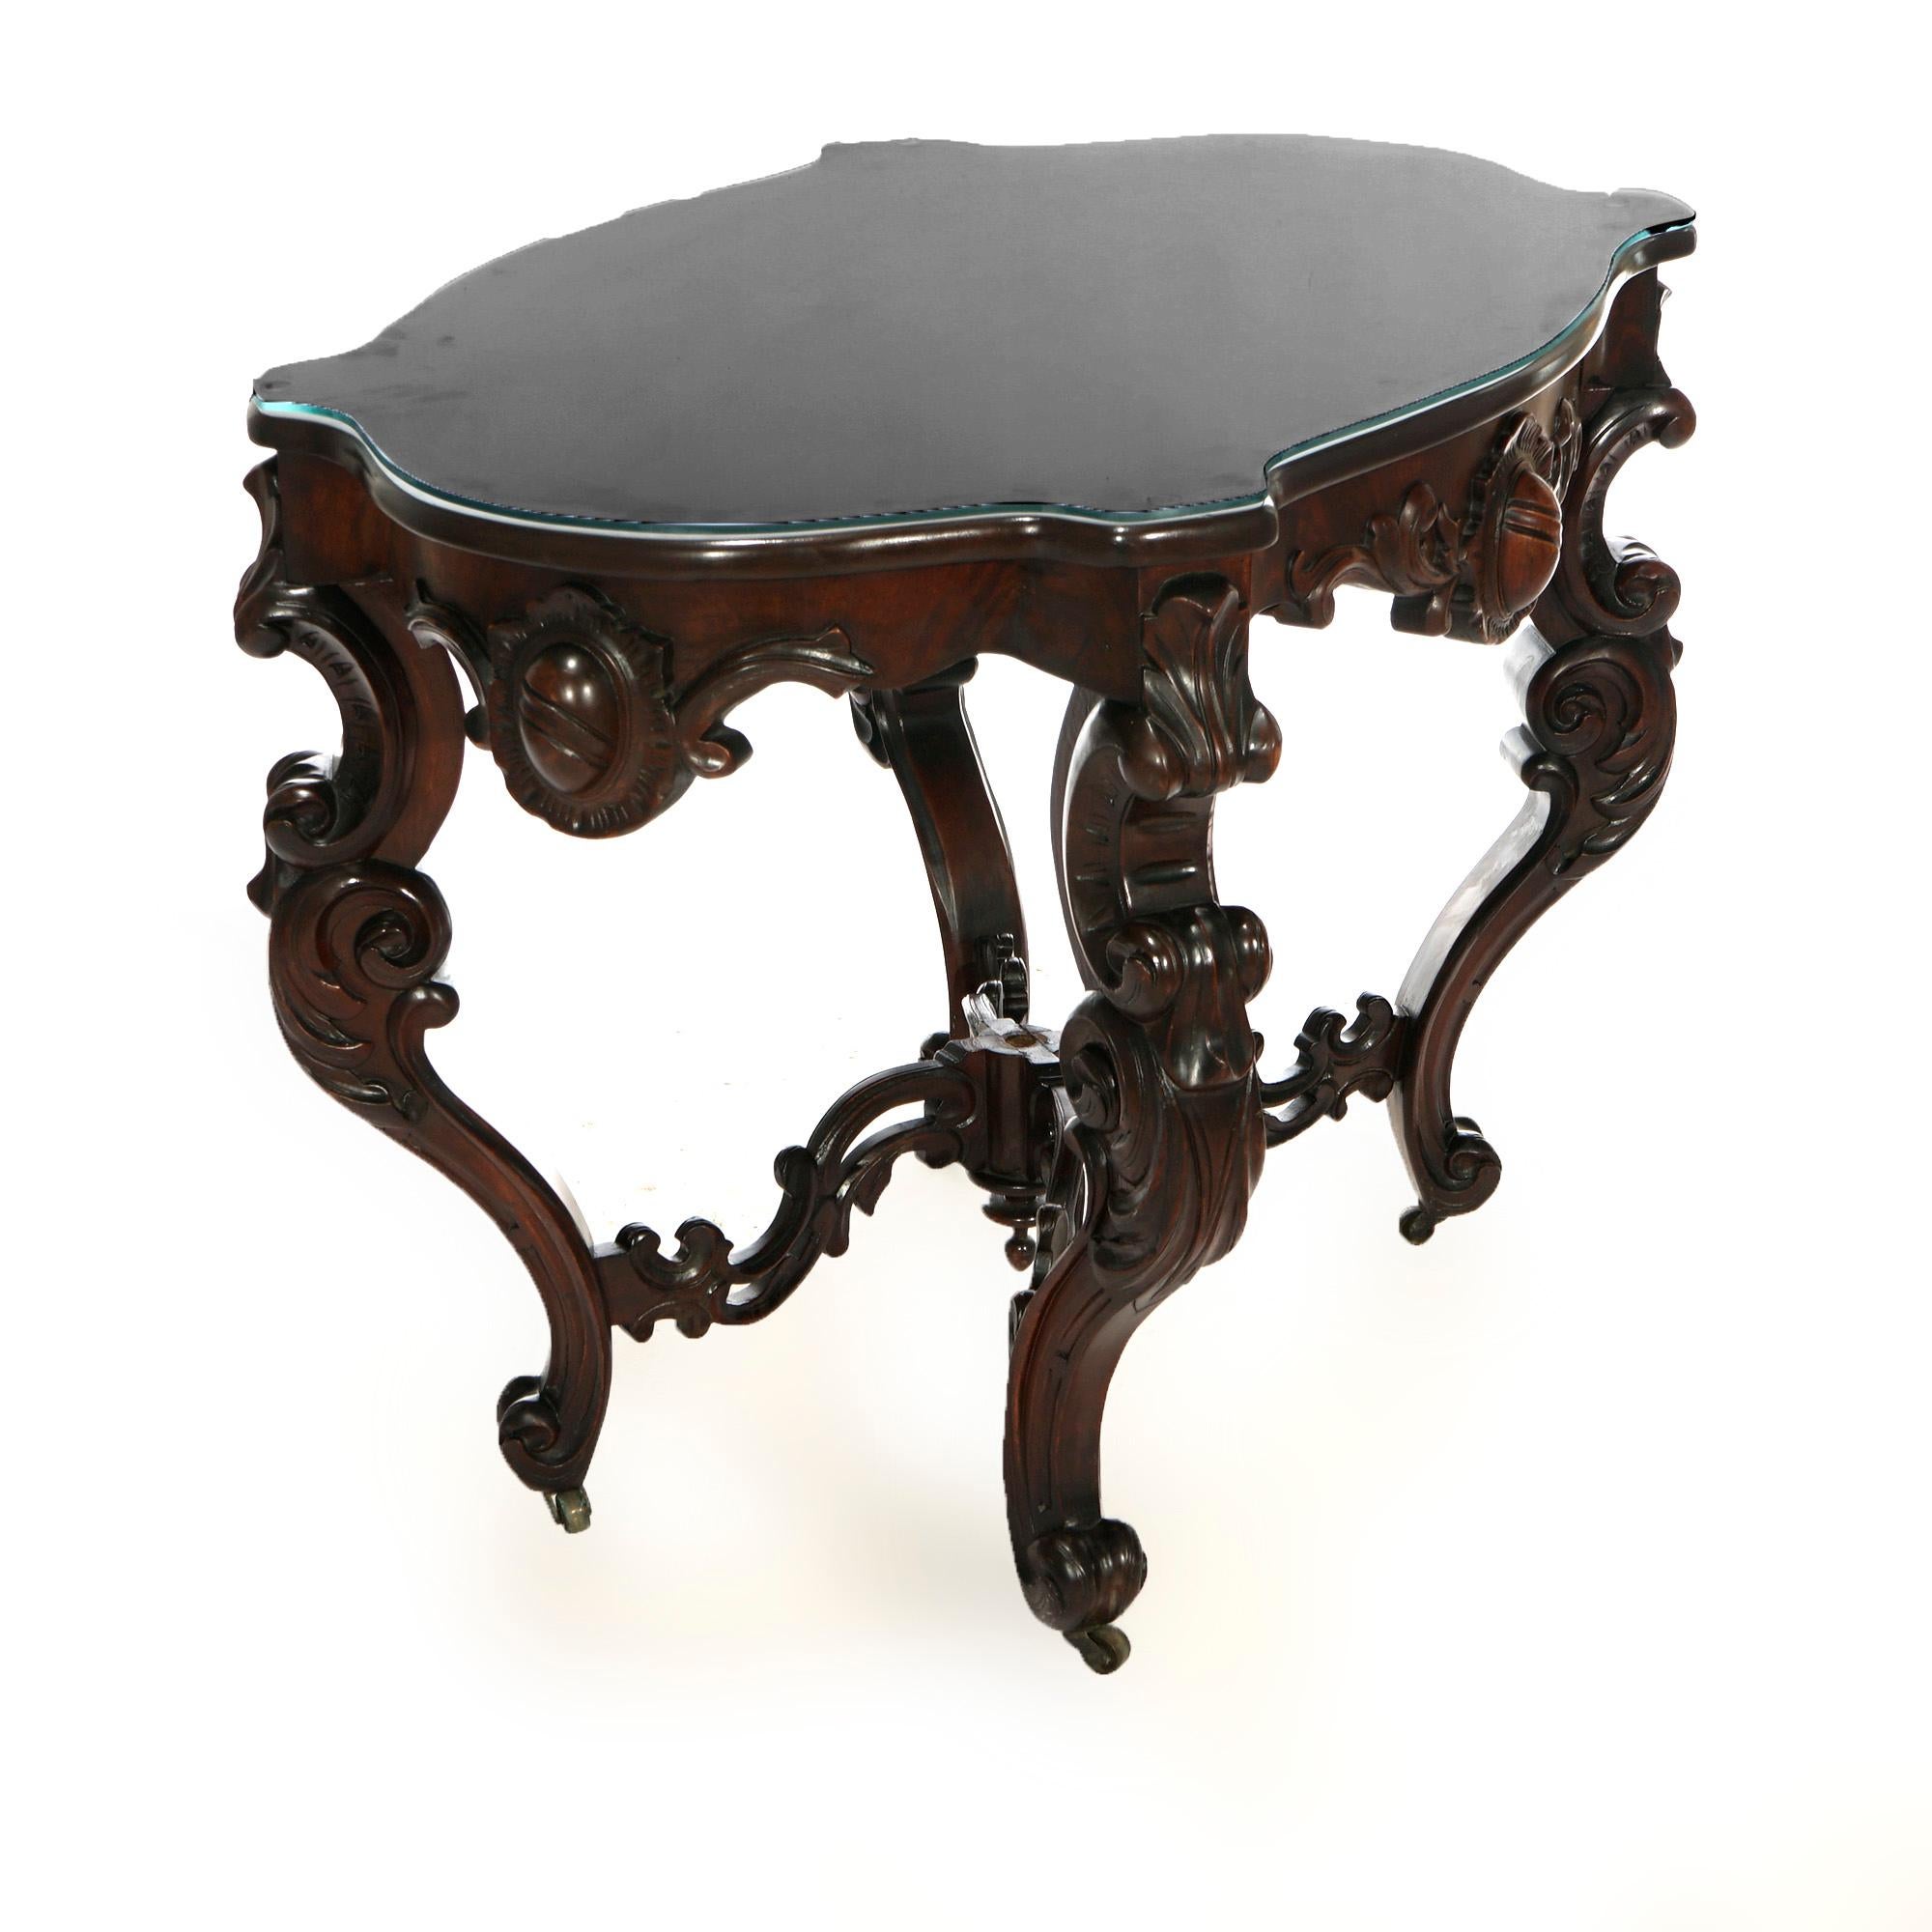 An antique Rococo Revival parlor table offers shaped marble turtle top over walnut base having carved scroll and foliate decoration, raised on scroll form cabriole legs with stretcher having central finial, 19th century

Measures- 30.25'' H x